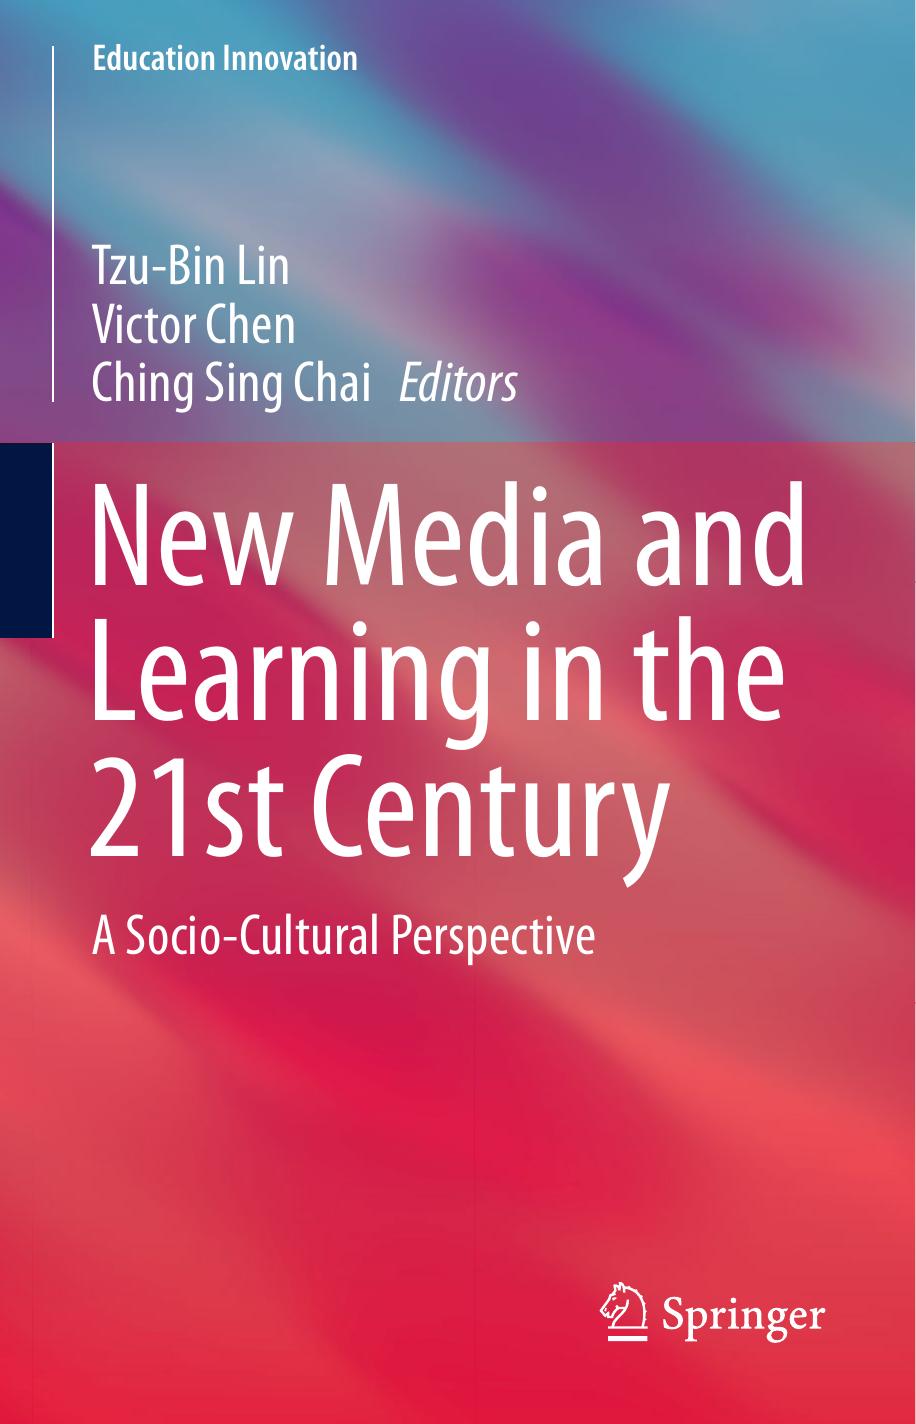 New Media and Learning in the 21st Century A Socio-Cultural Perspective, 2015